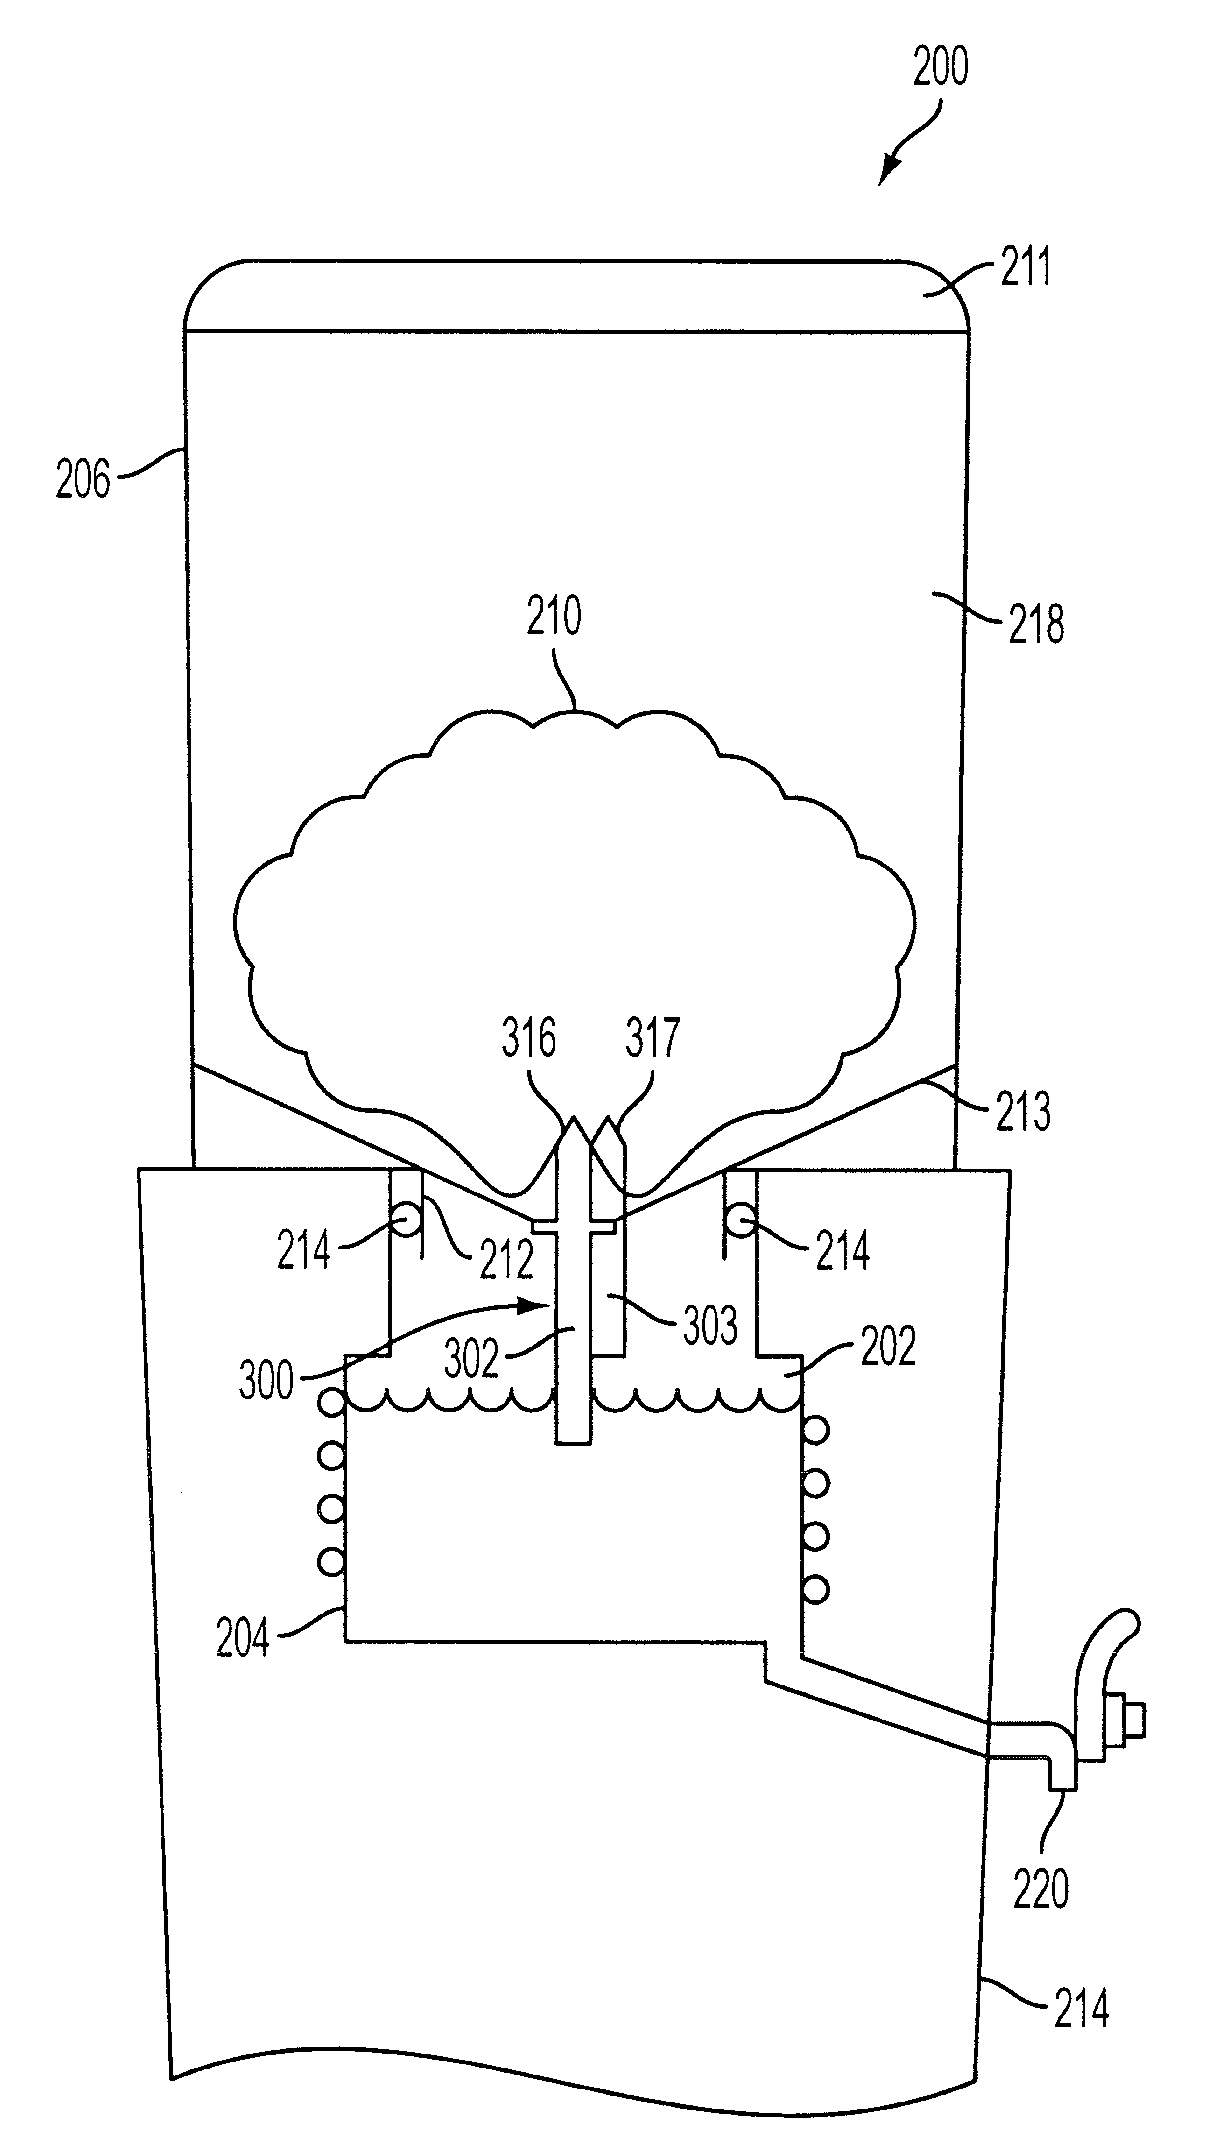 Bag Cooler Employing a Multi-Spike Adapter and Converter